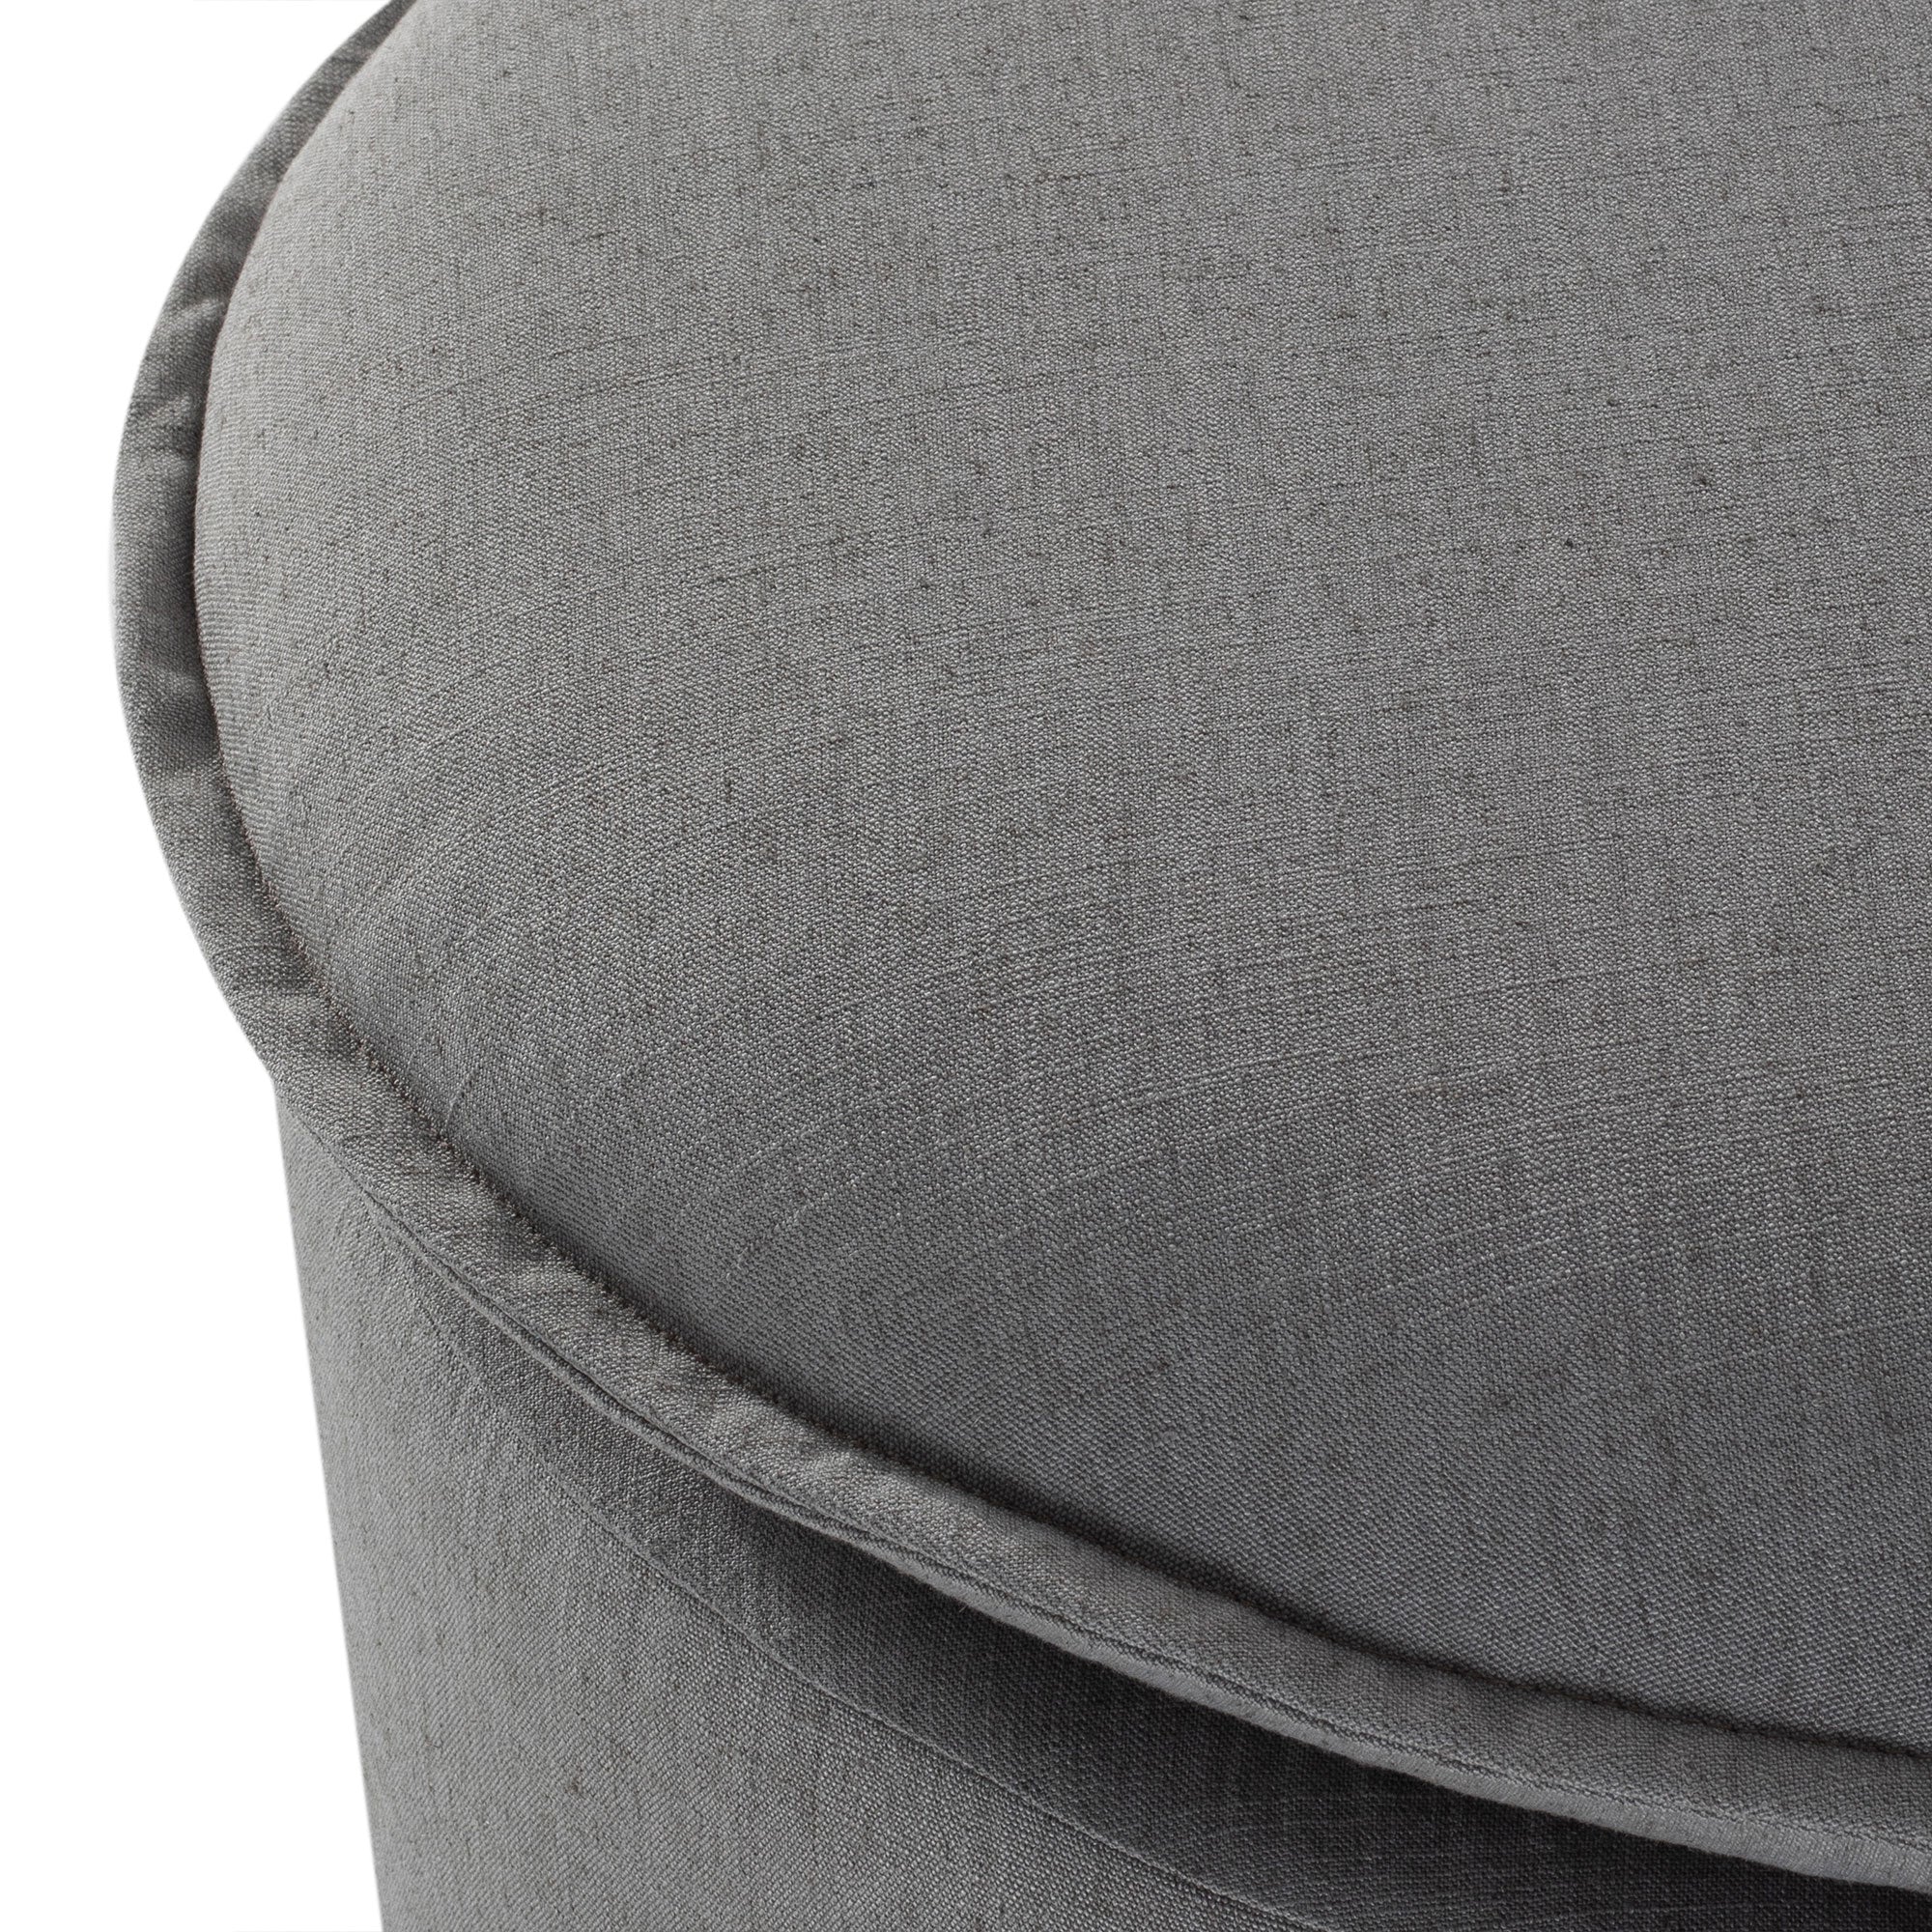 Lyra Organic Ottoman in Slate Fabric Upholstery in Ottomans & Benches by Maven Lane